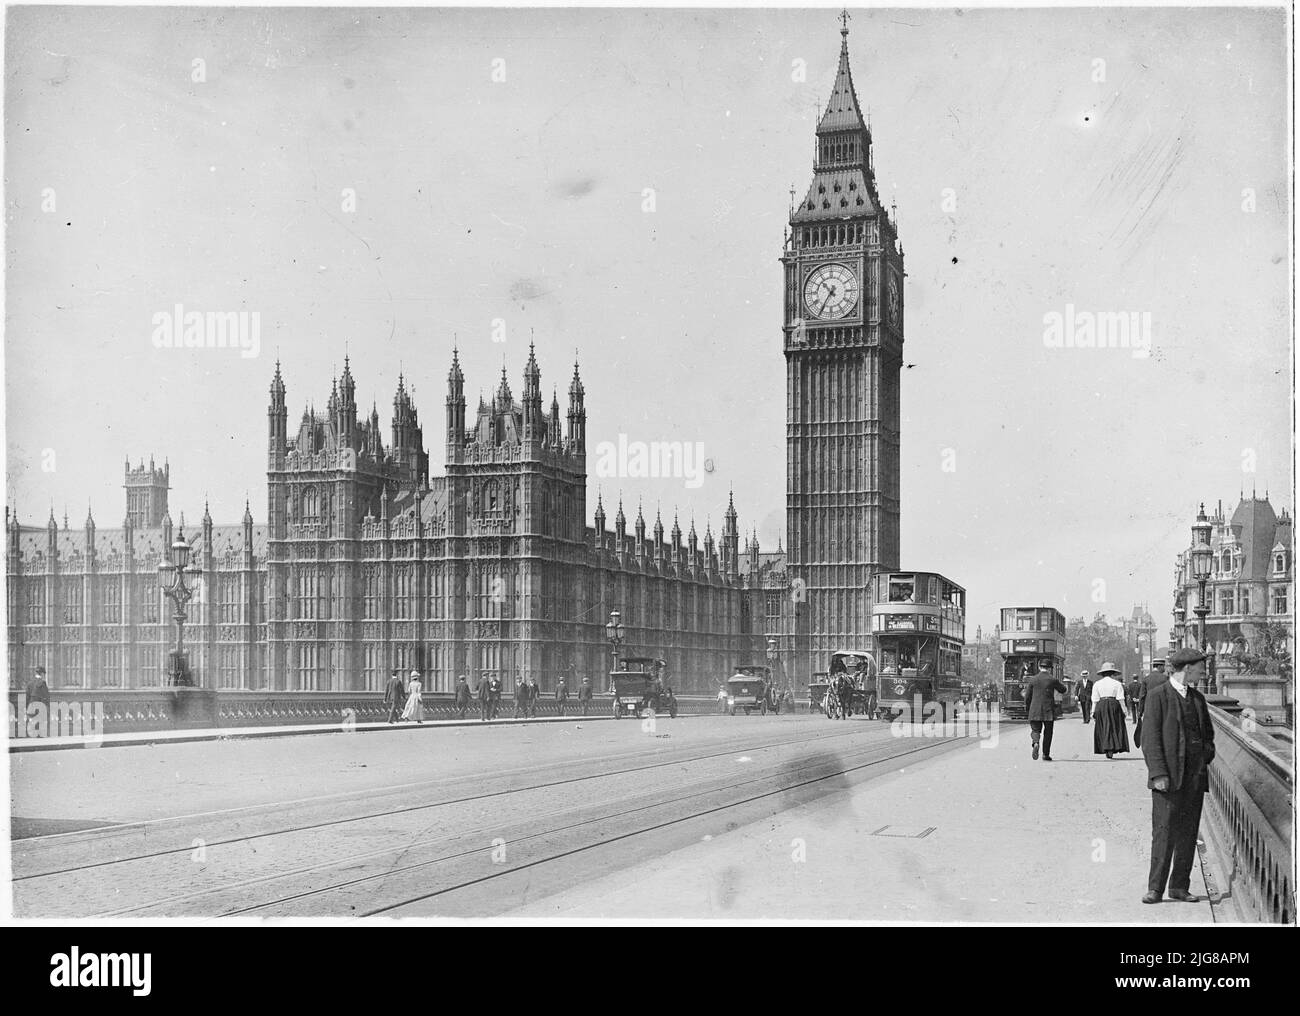 Palace of Westminster, Parliament Square, Westminster, City of Westminster, Greater London Authority, 1911. The Palace of Westminster seen from Westminster Bridge, with pedestrians and motor vehicles in the foreground. Stock Photo